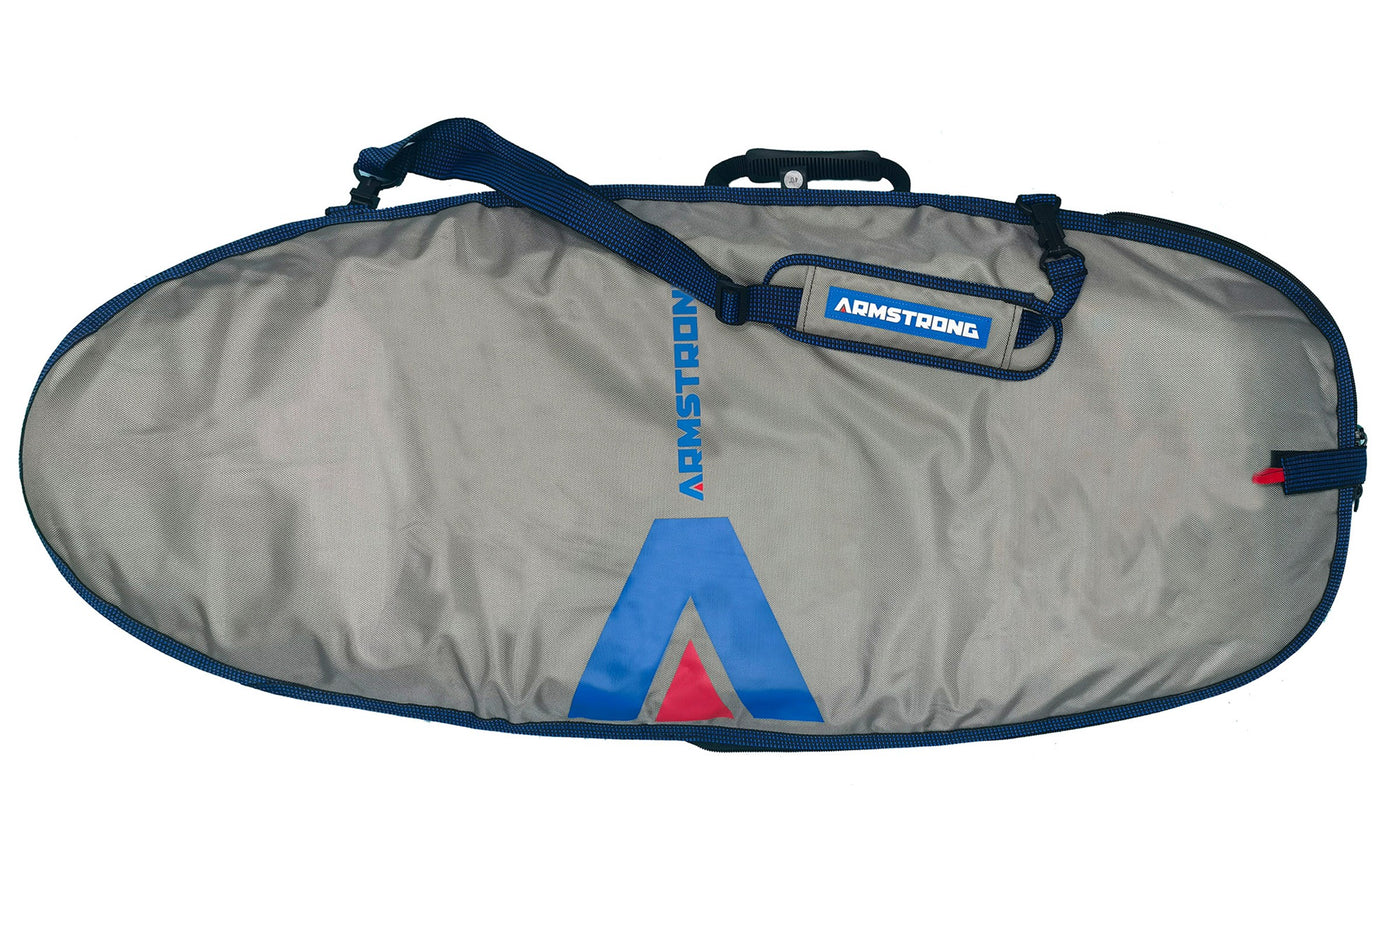 Armstrong Wing Surf Foil Board Bag